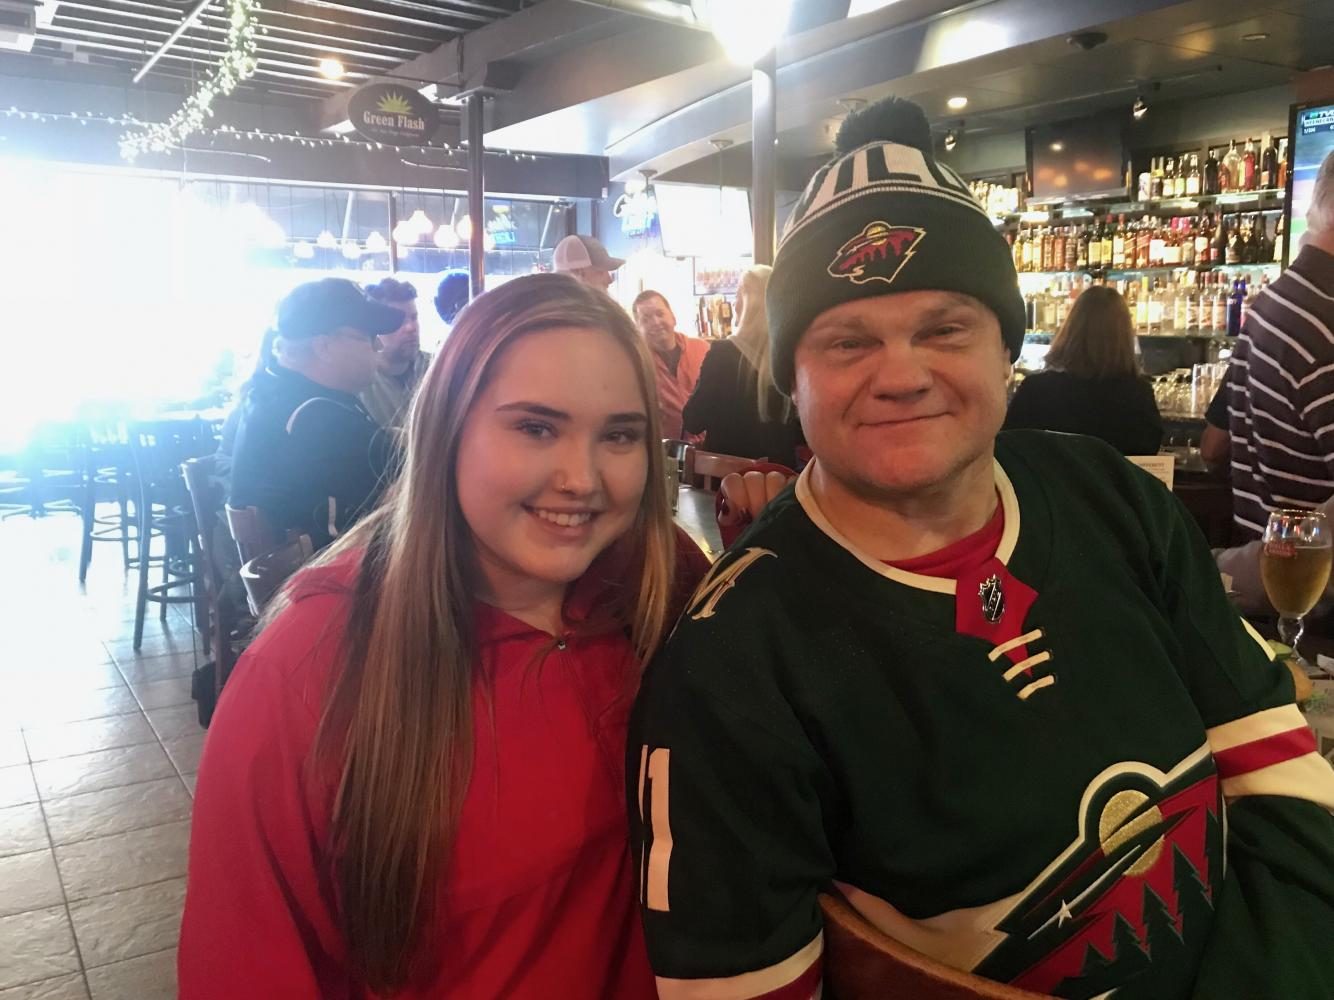 The United hockey team held an event for Russ Ebnet on Oct. 21 at Burger Moes in St. Paul to announce their fundraising efforts. “[...][You] aren’t just playing for yourself, you’re playing for your whole community. It’s helping us all become bigger people and realize how important it is to help out in things you believe in,” United player Kenzie Giese said.